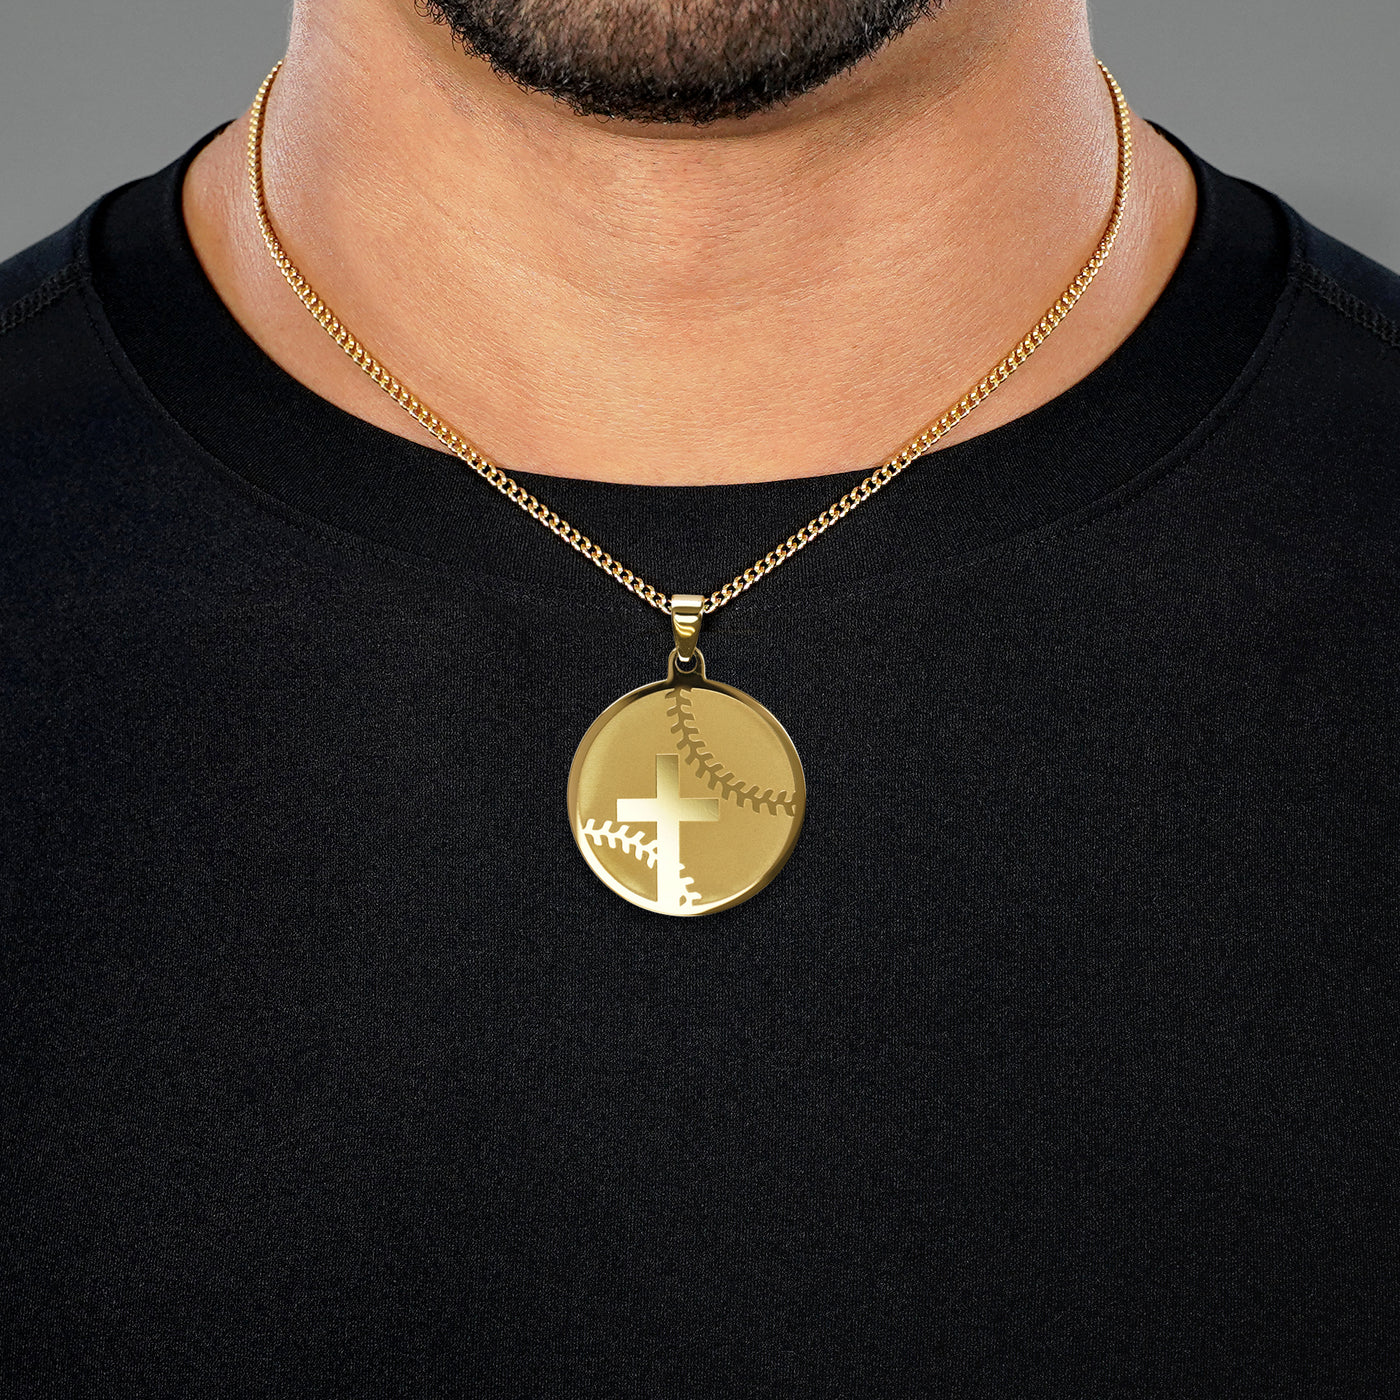 Baseball Faith Cross Pendant with Chain Necklace - Gold Plated Stainless Steel